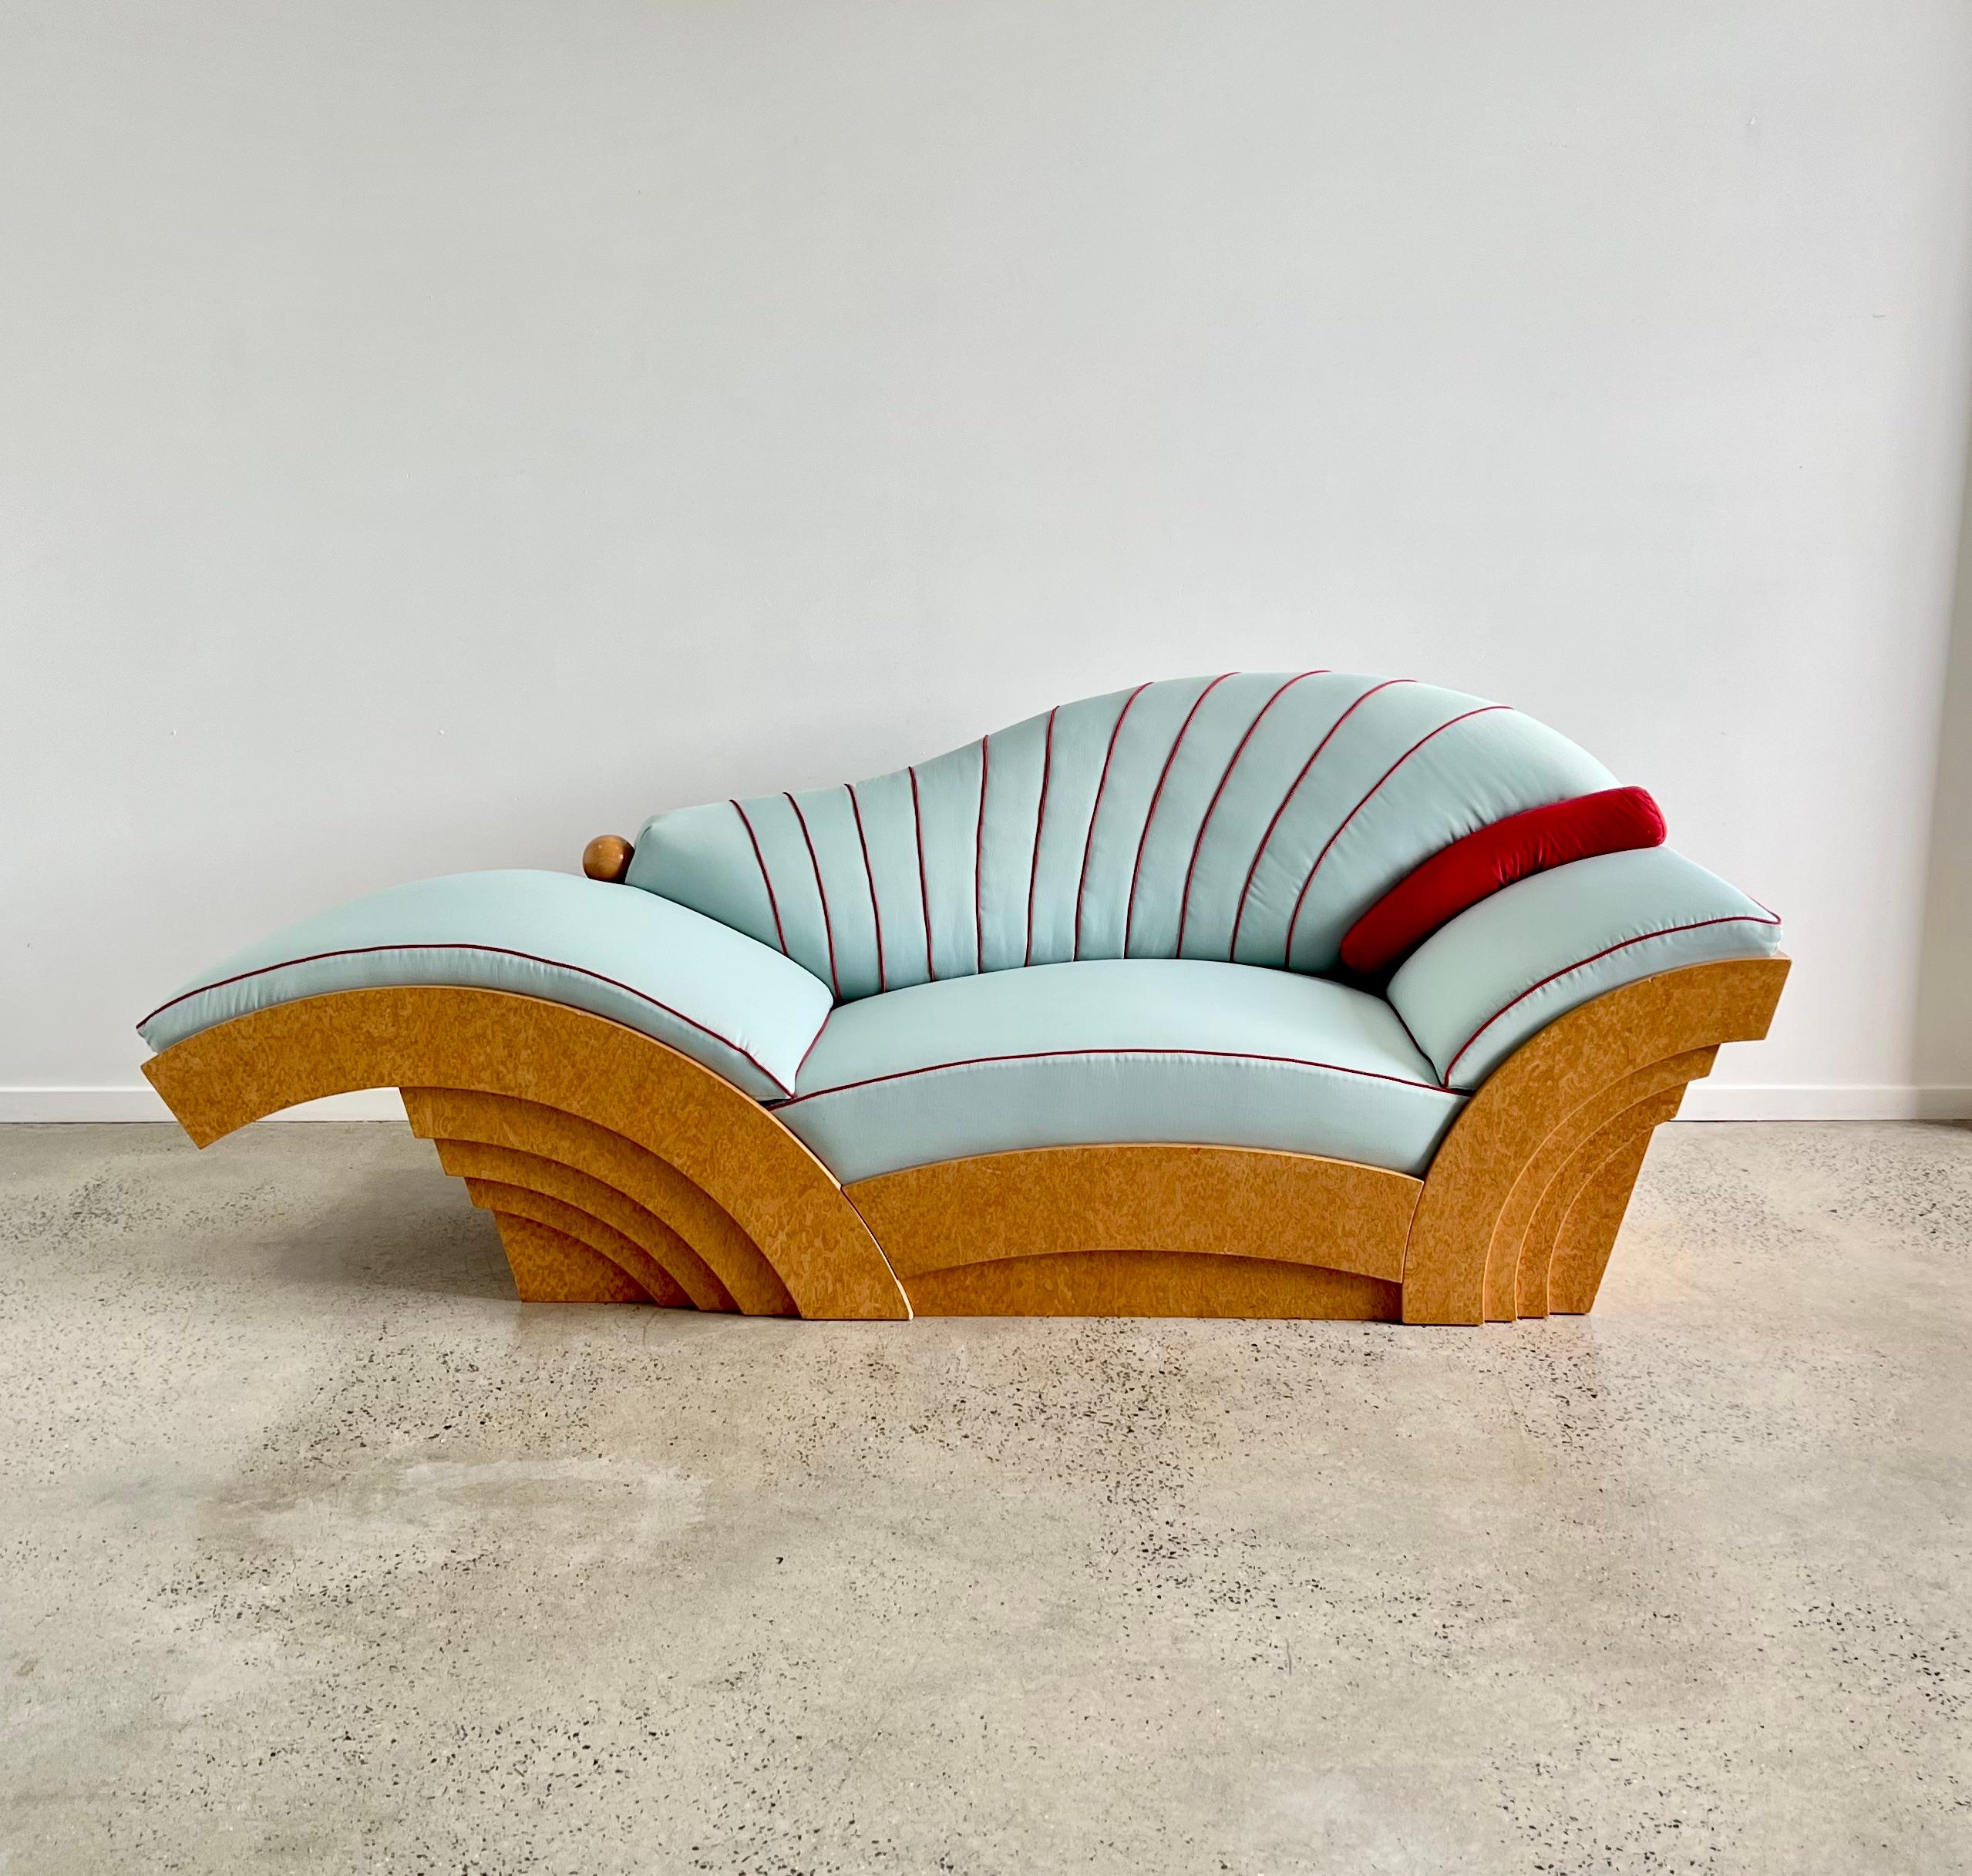 A beautiful and rare sofa from this post-modern Austrian designer. Hollein was born in Vienna in 1934 and worked with Sottsass during the Memphis period. This rare and unique sofa was produced in a limited edition by Poltronova and named after